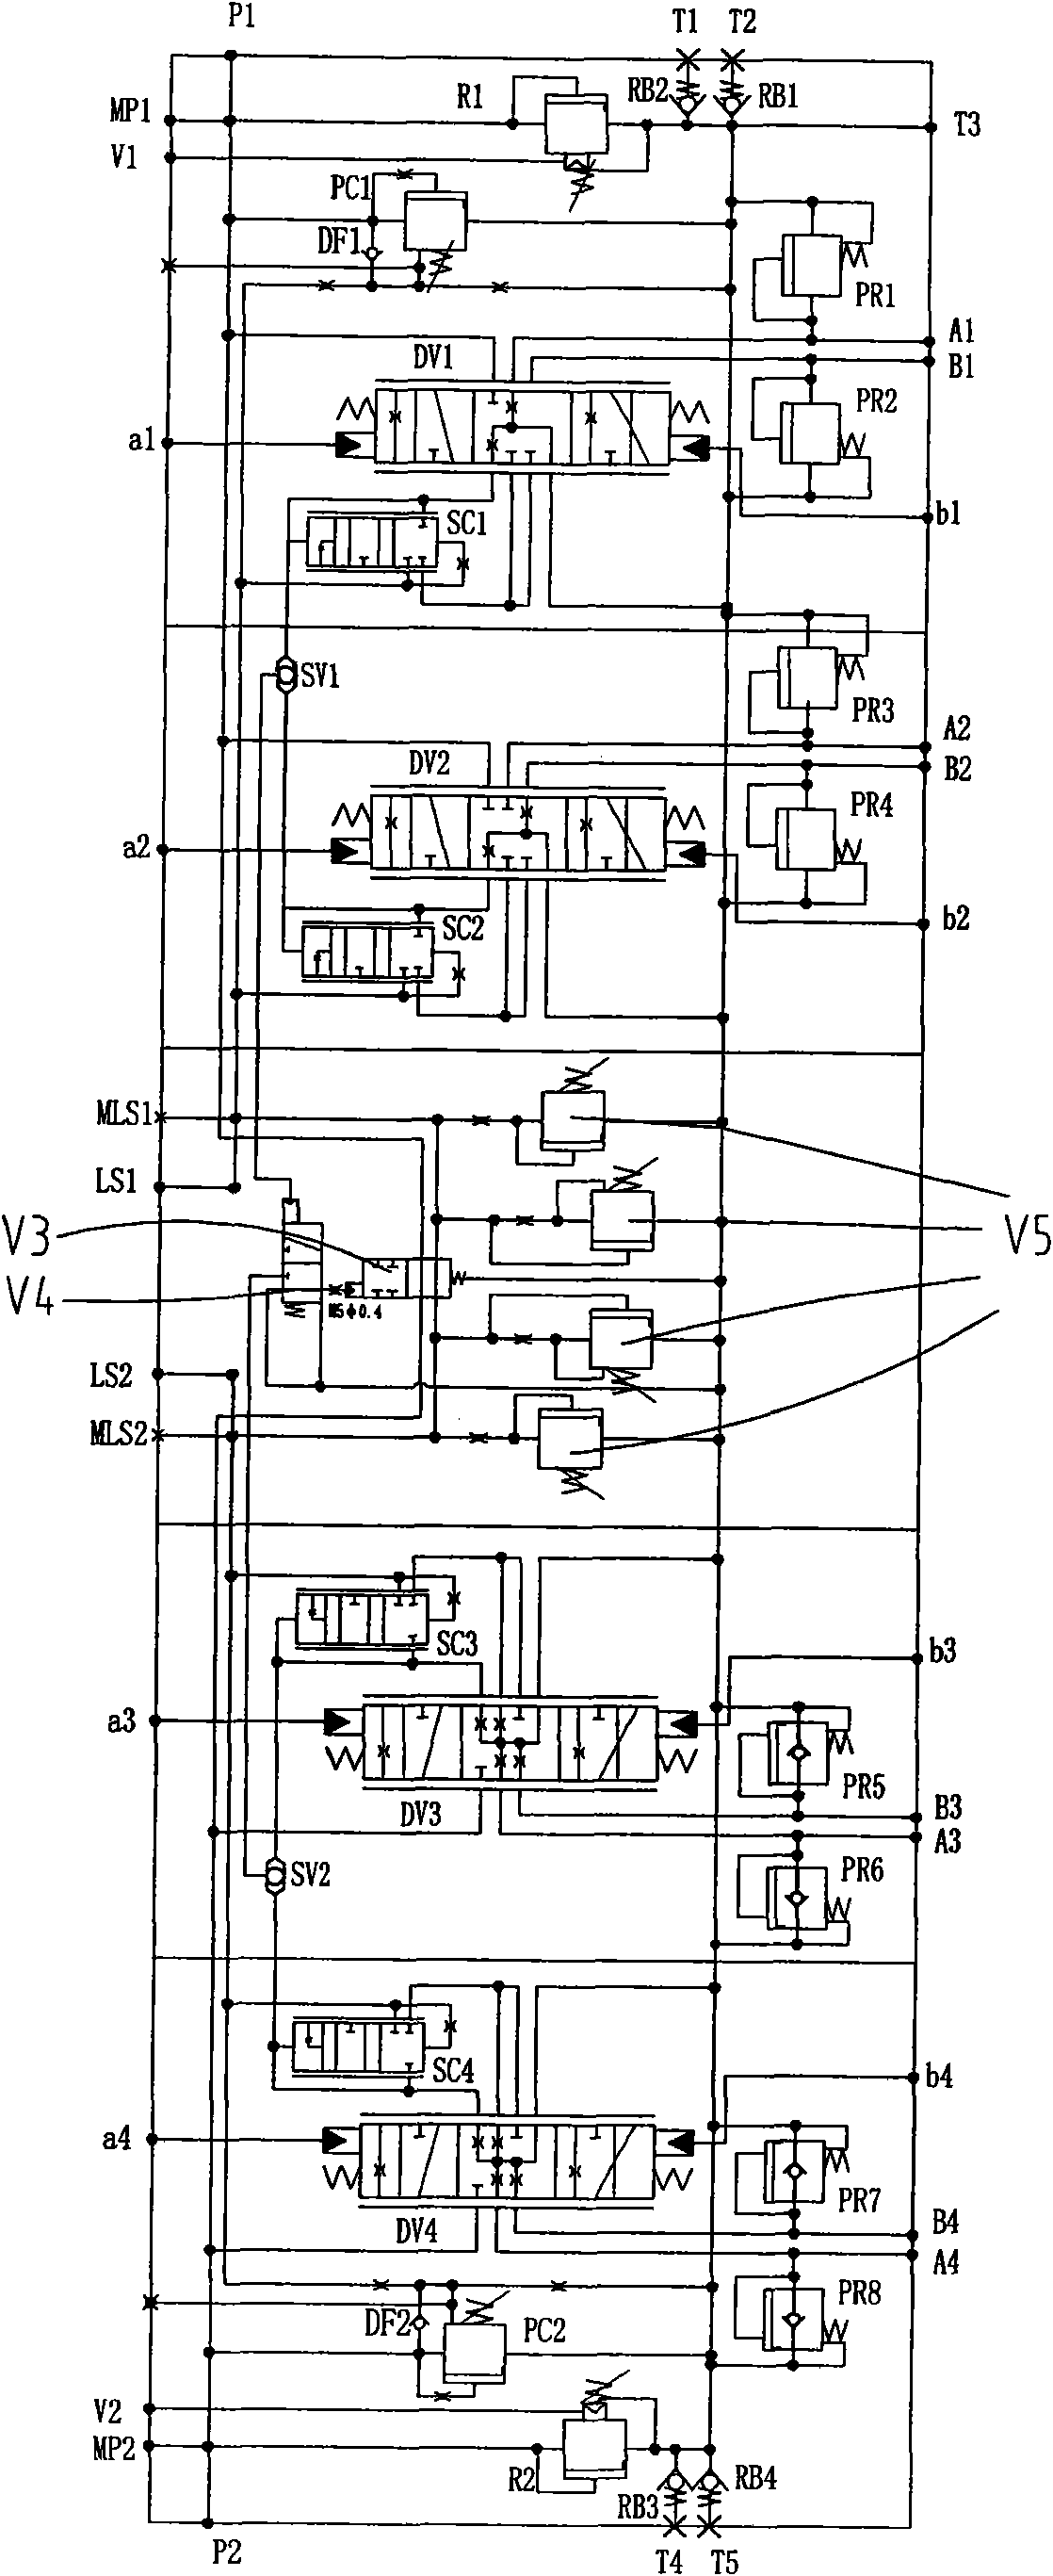 Multi-channel proportional flow distribution valve bank applicable to various variable pump systems